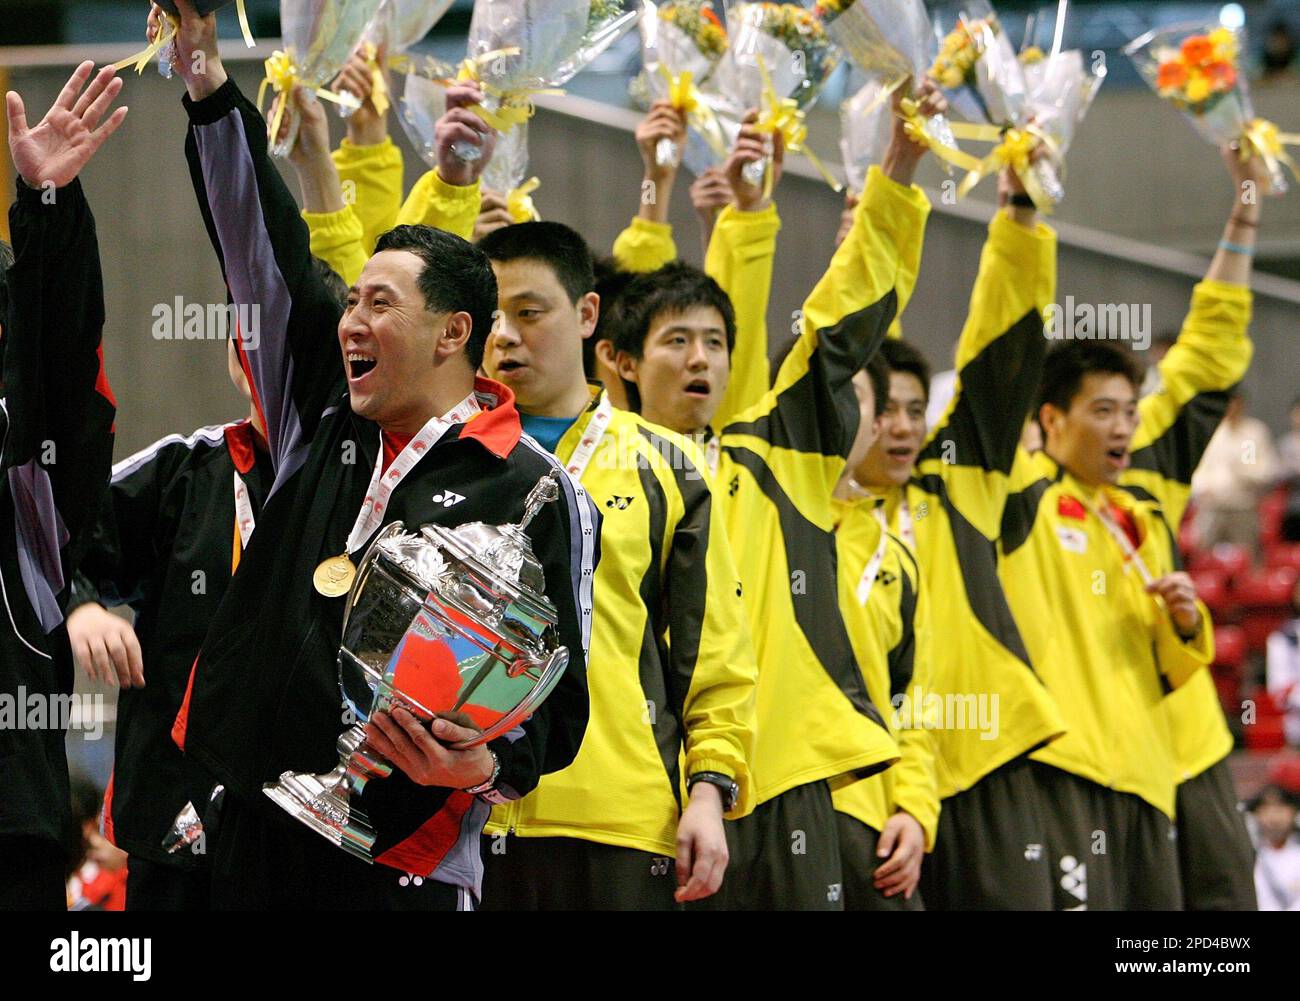 Chinas head coach Li Yongba, left, holds the Thomas Cup trophy as the team members acknowledge the crowd at the Thomas and Uber Cup Badminton final in Tokyo, Sunday, May 7, 2006.